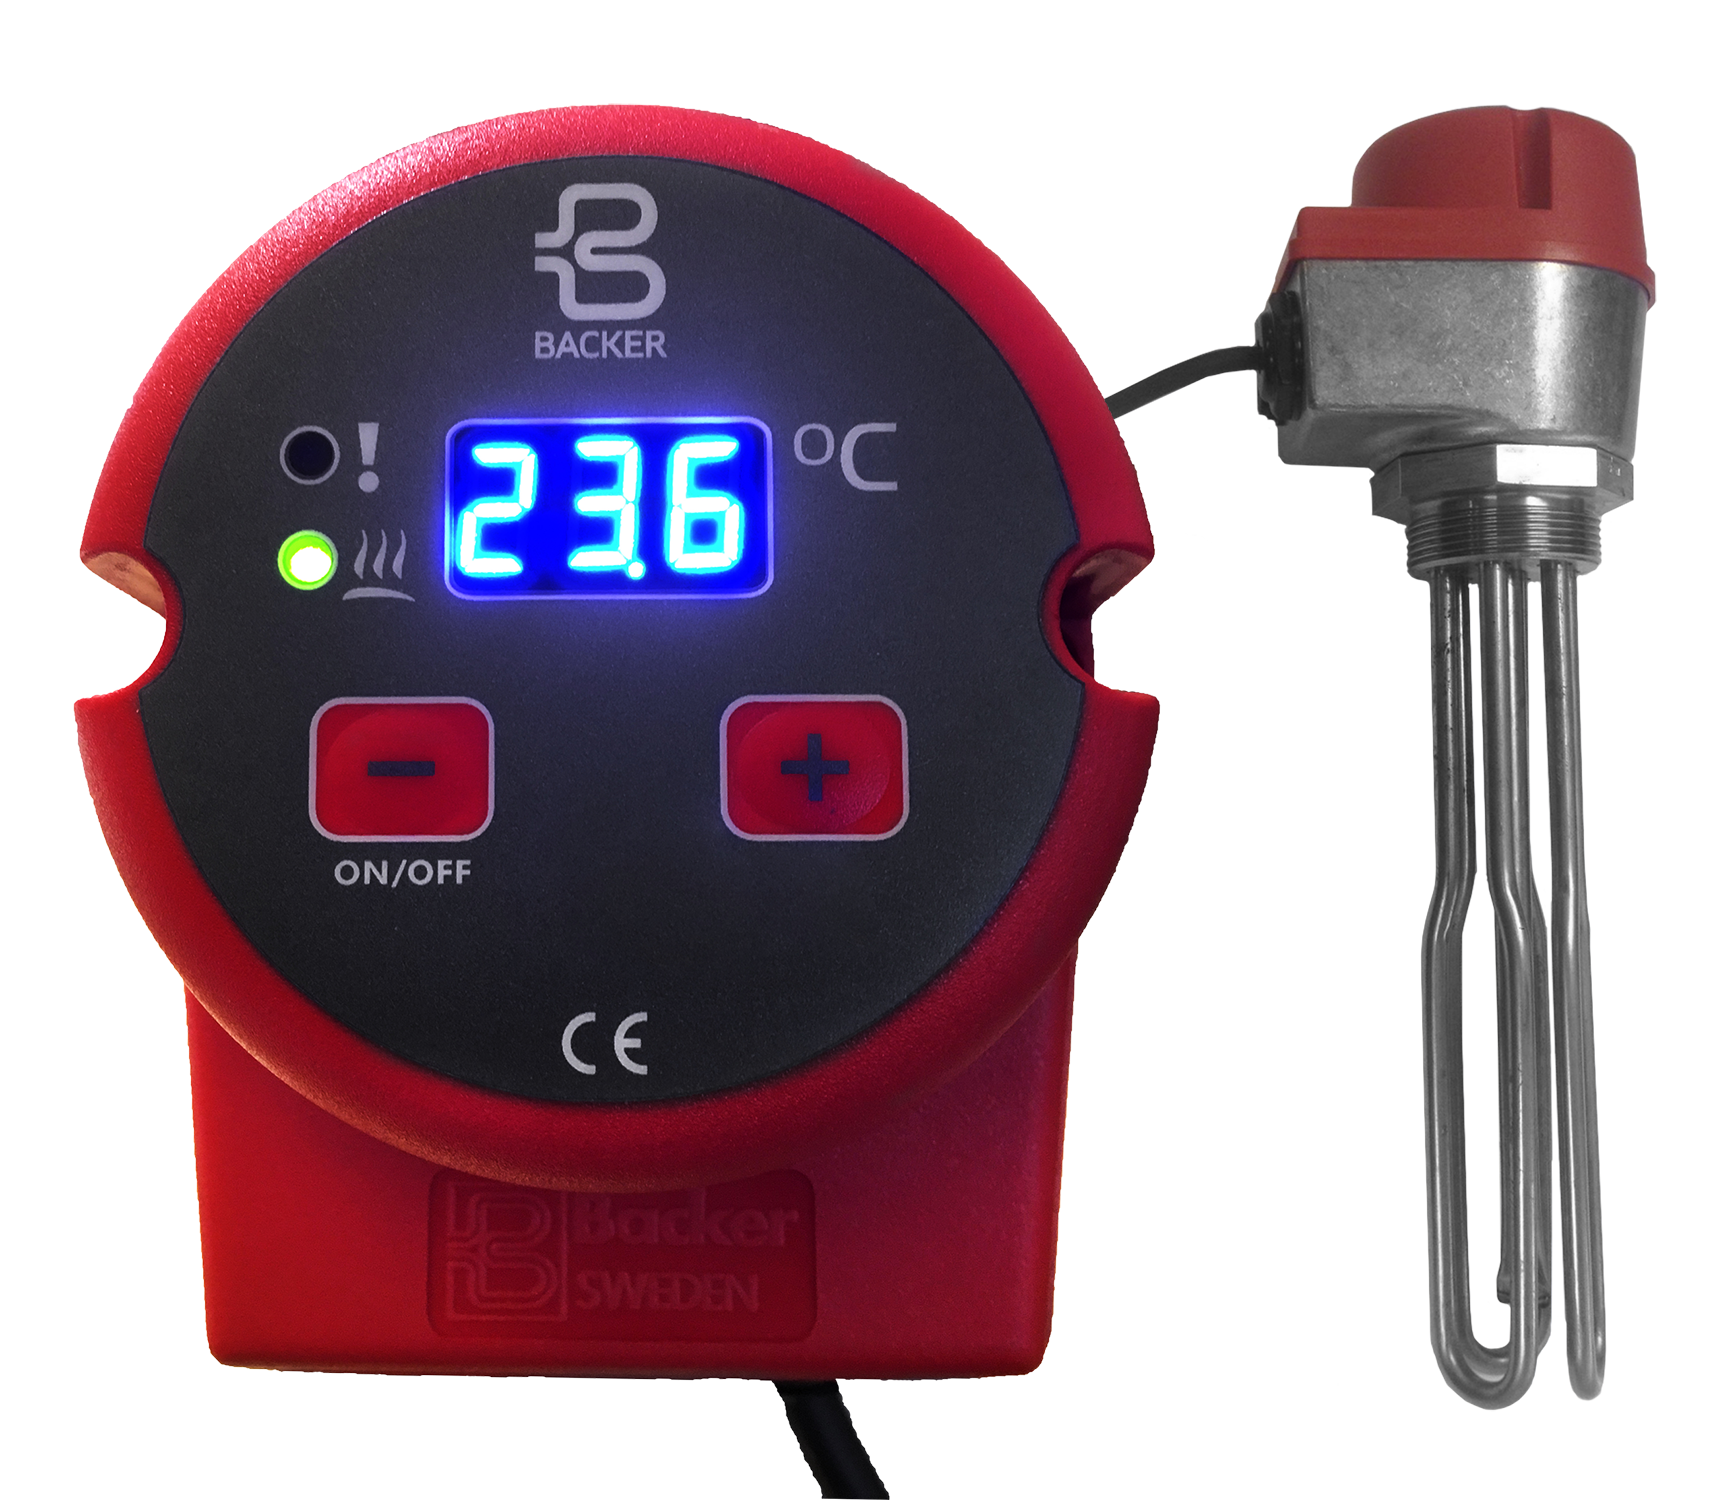 Immersion heater with electronic control